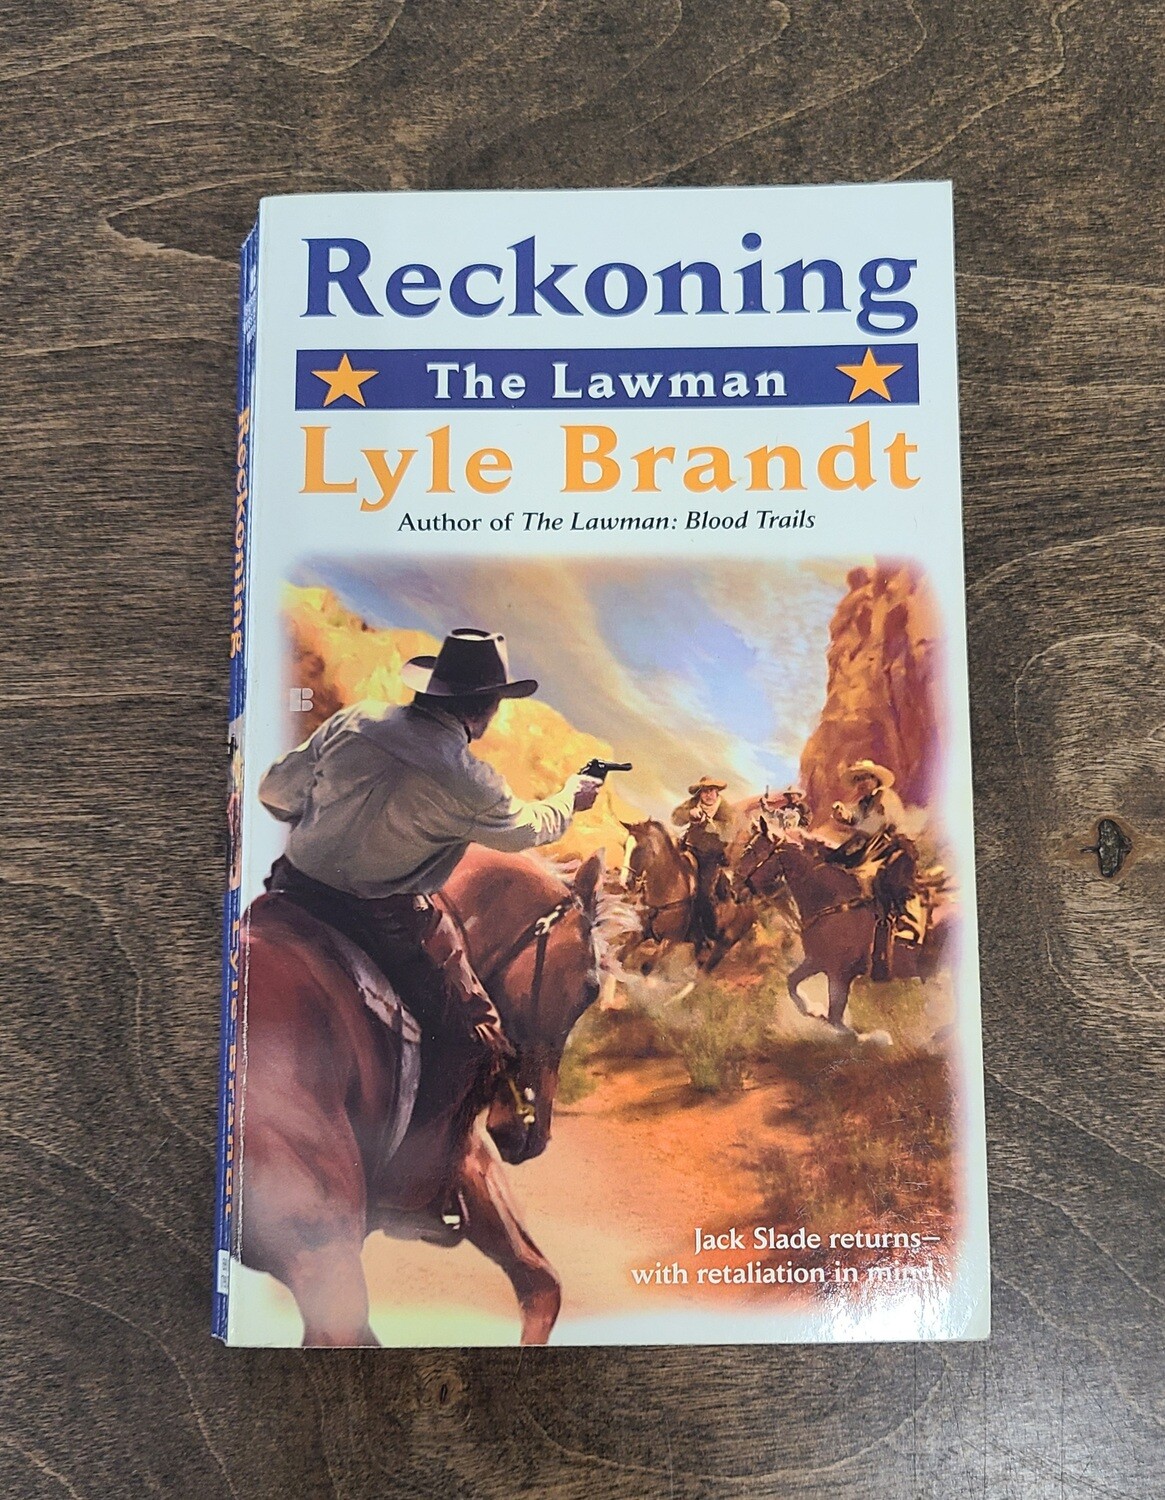 The Lawman: Reckoning by Lyle Brandt